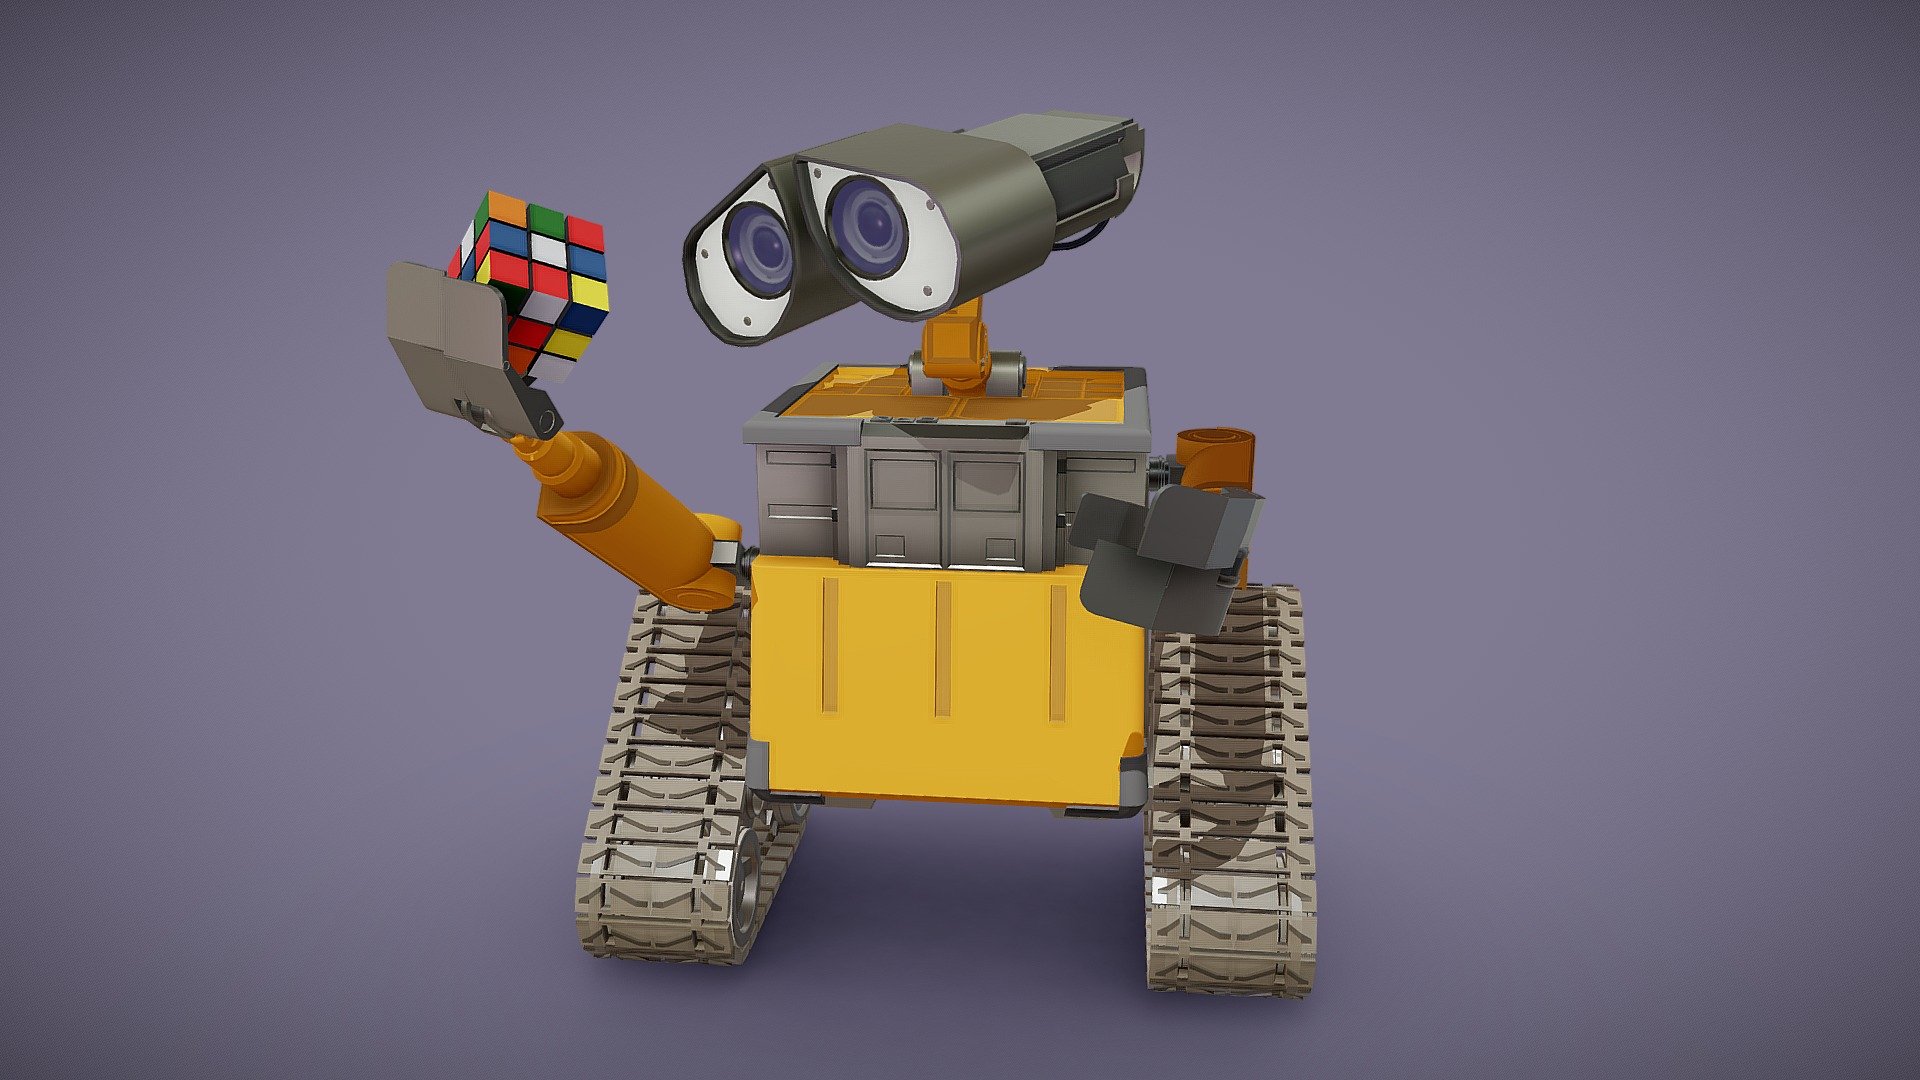 Hallo my name is Sergey Kadykov (Vivern), and I’m a student of XYZ school - course DraftPank. 
This is a course asset model (Detailed Draft) from the cartoon Disney Pixar - Wall-E - Course asset (Wall-E FanArt) - 3D model by VIvern 3d model